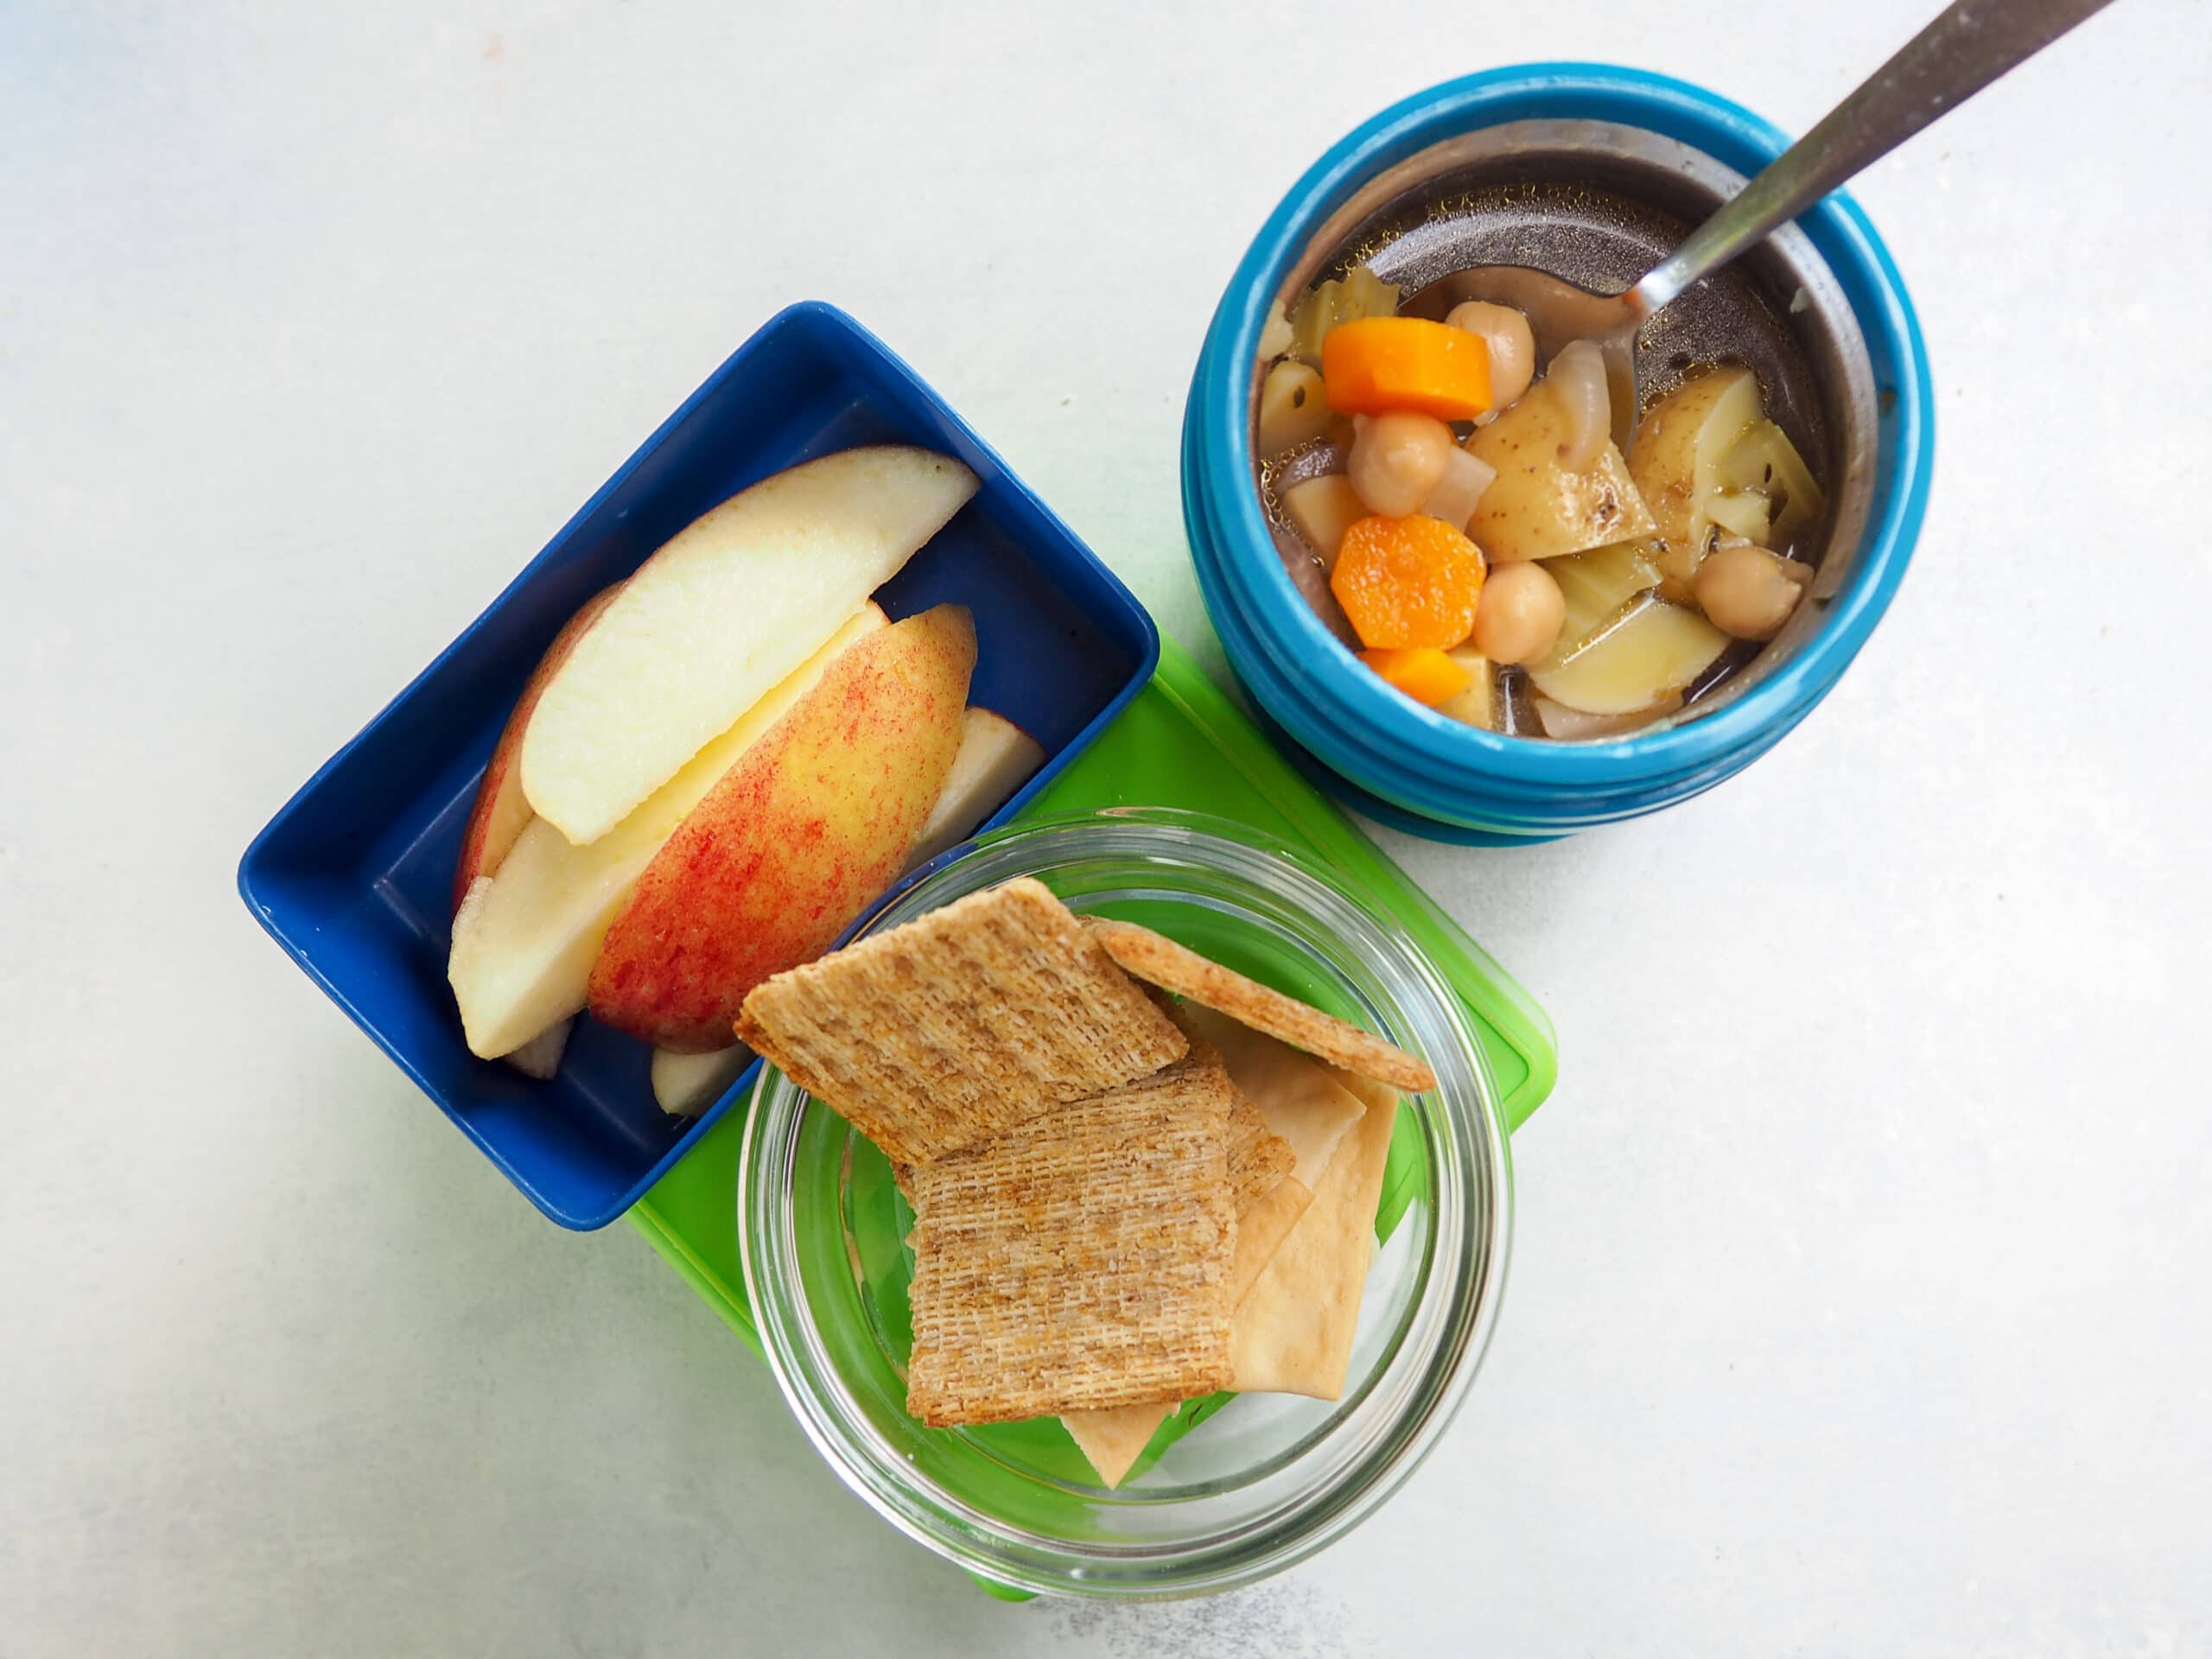 Need ideas on how to pack a balanced vegetarian lunch box for your child? Here is a handy guide. Plus a 5-day sample lunch plan. From halsanutrition.com